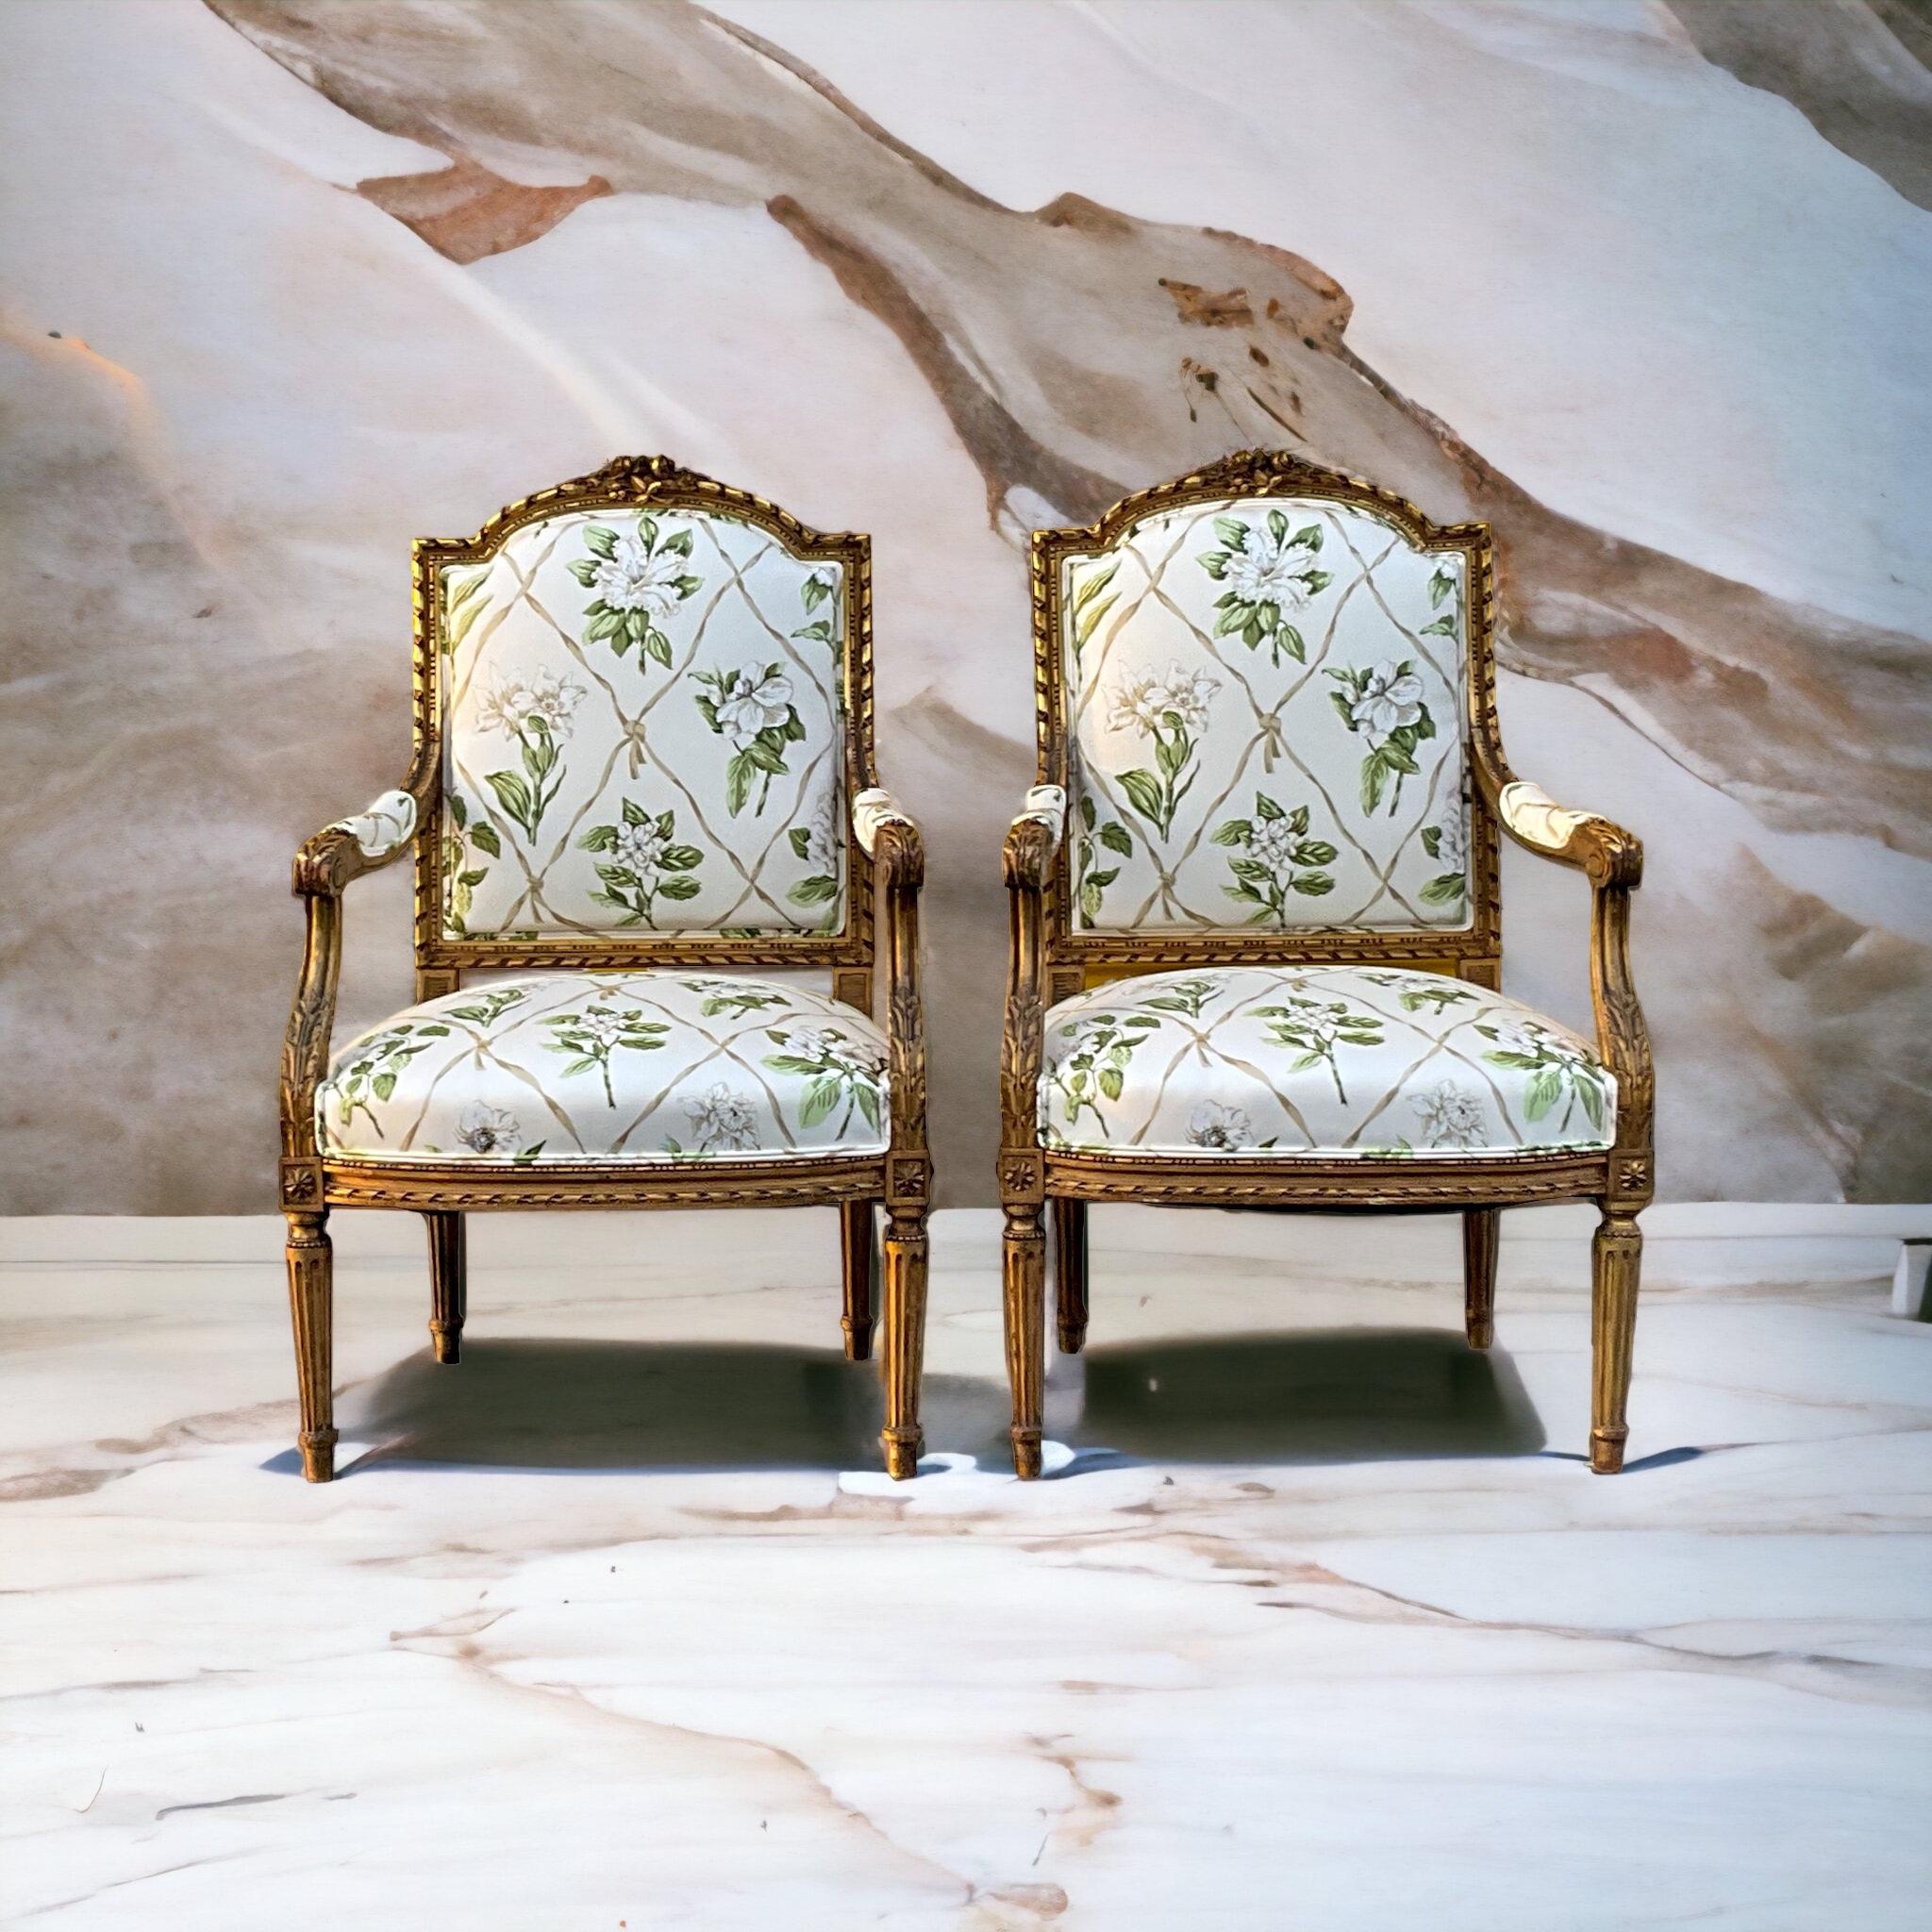 This is a pair of French Louis XVI style carved gilt wood bergere chairs in new upholstery. The upholstery is a lovely floral and ribbon cotton that I believe is by Travers.. The giltwood frames show some age appropriate wear but are sound. The arms